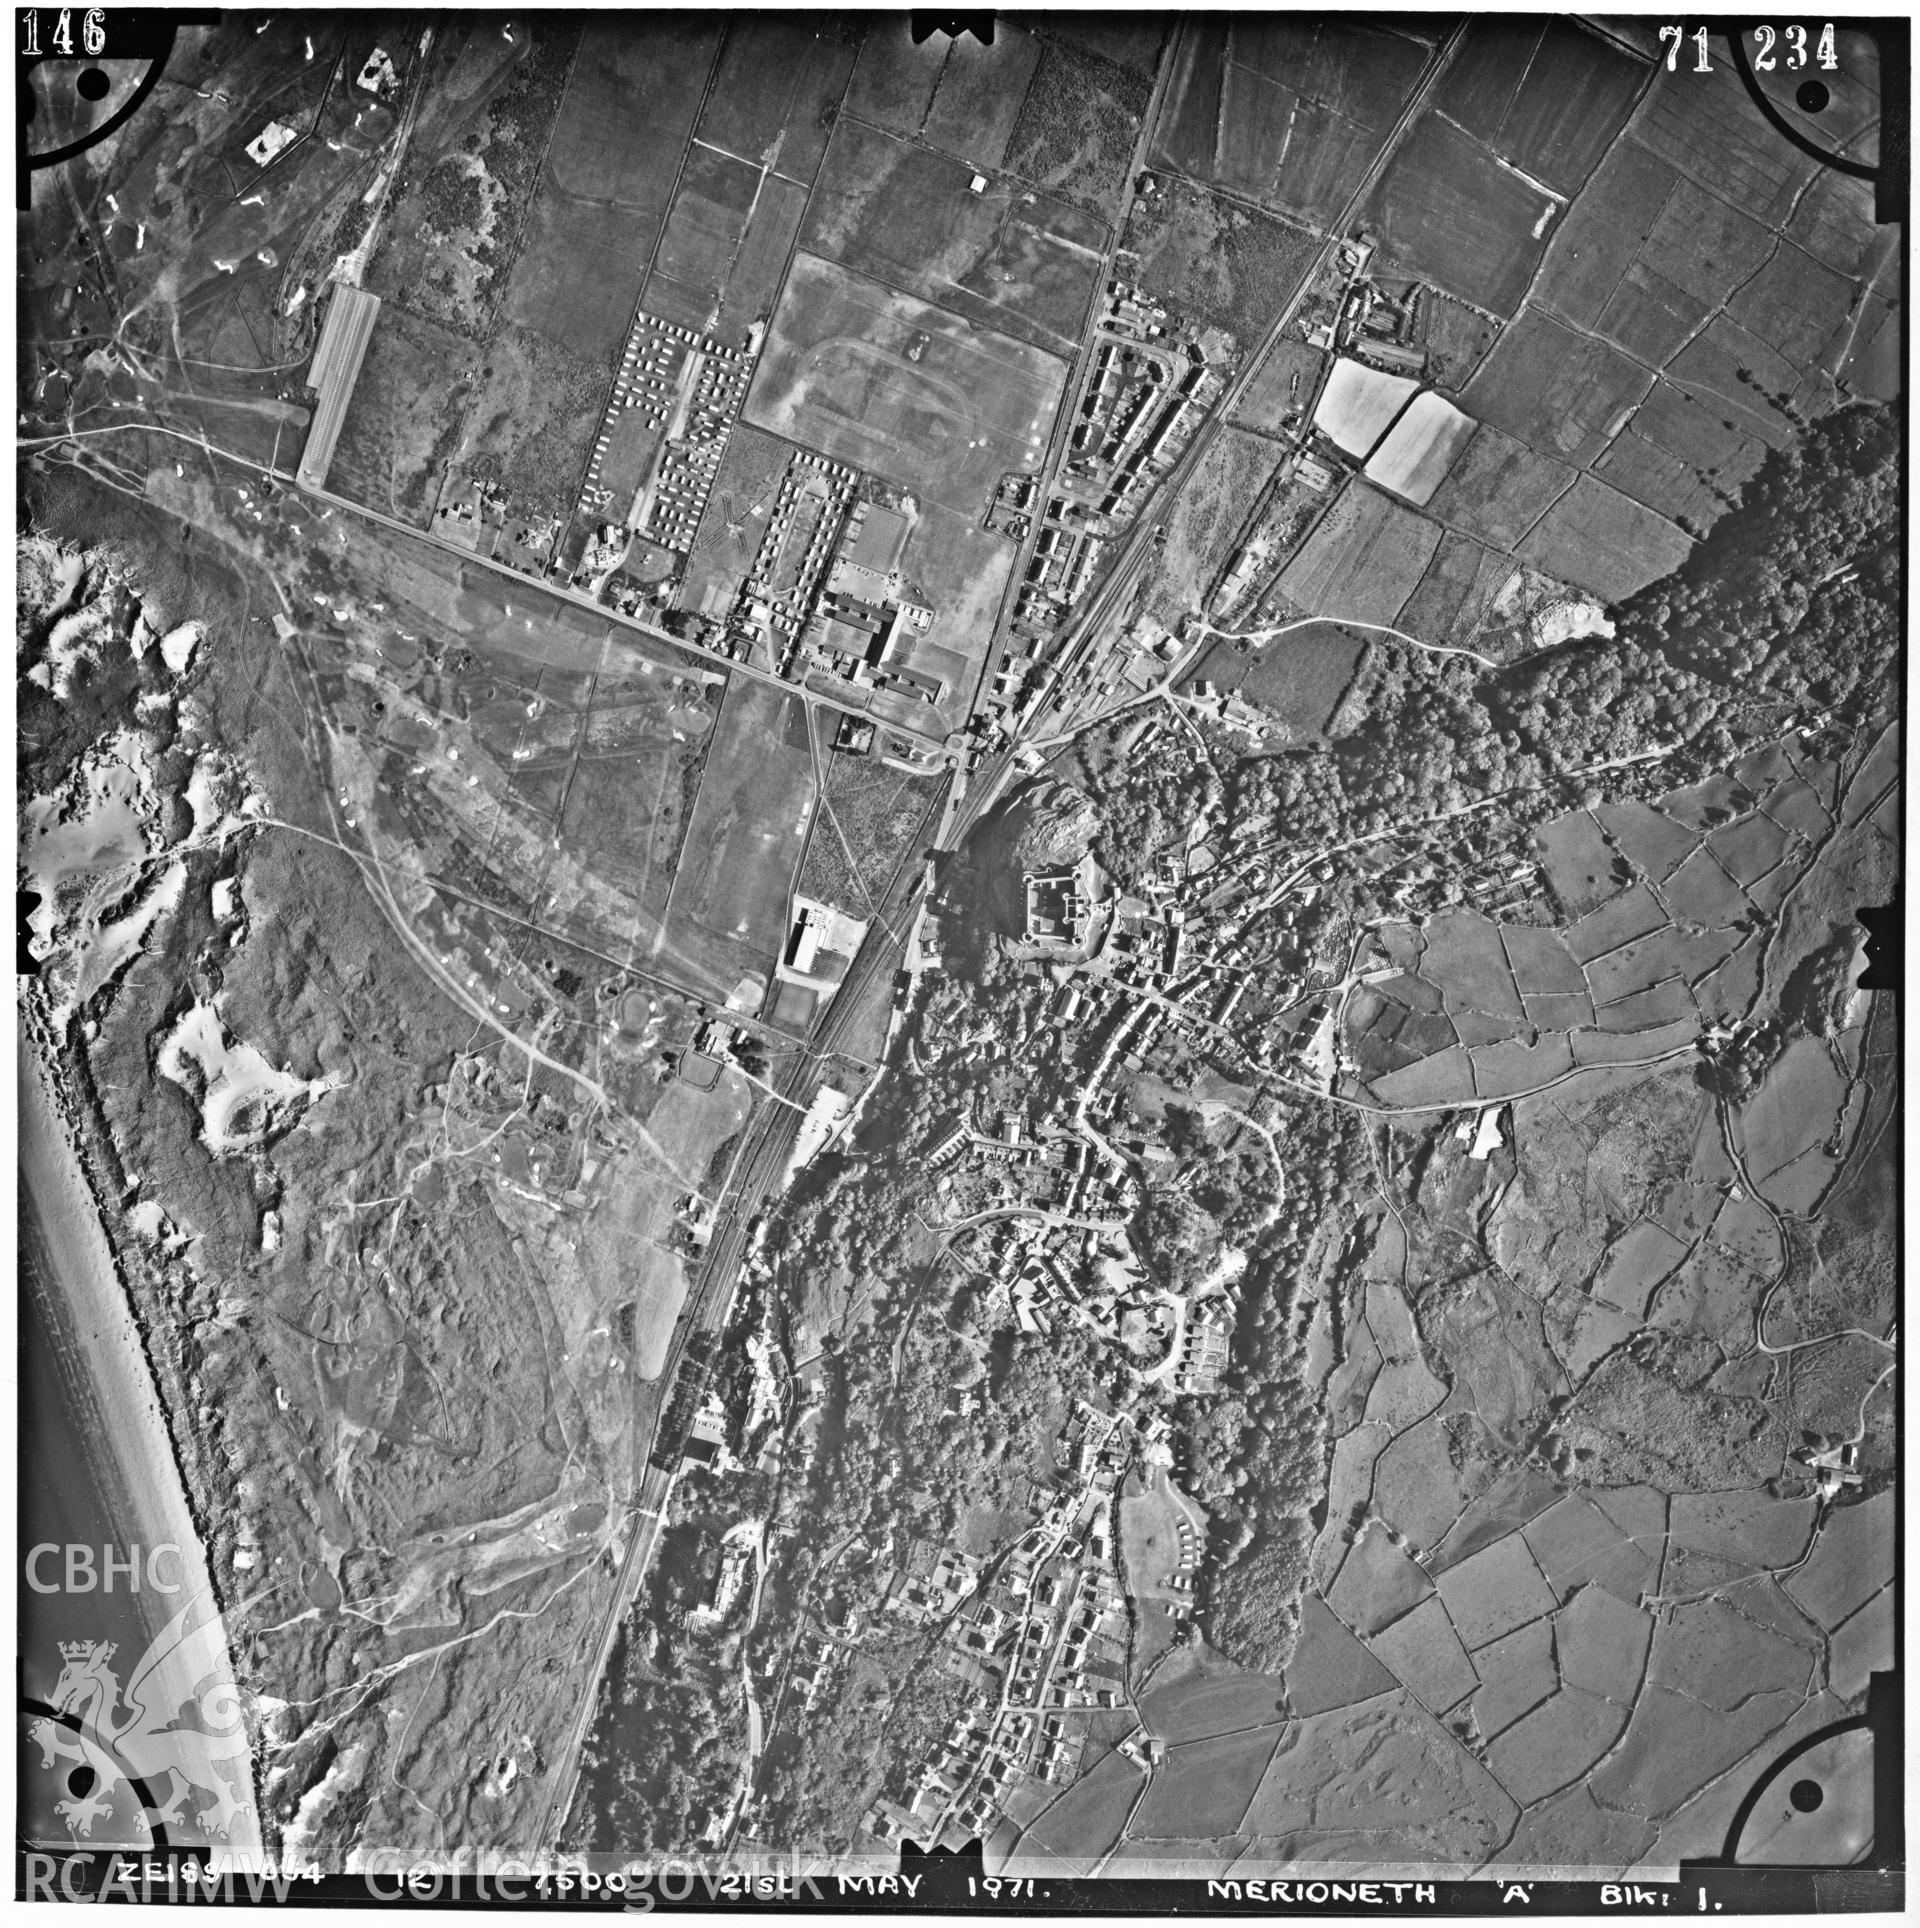 Digitized copy of an aerial photograph showing Harlech Town,  taken by Ordnance Survey, 1971.